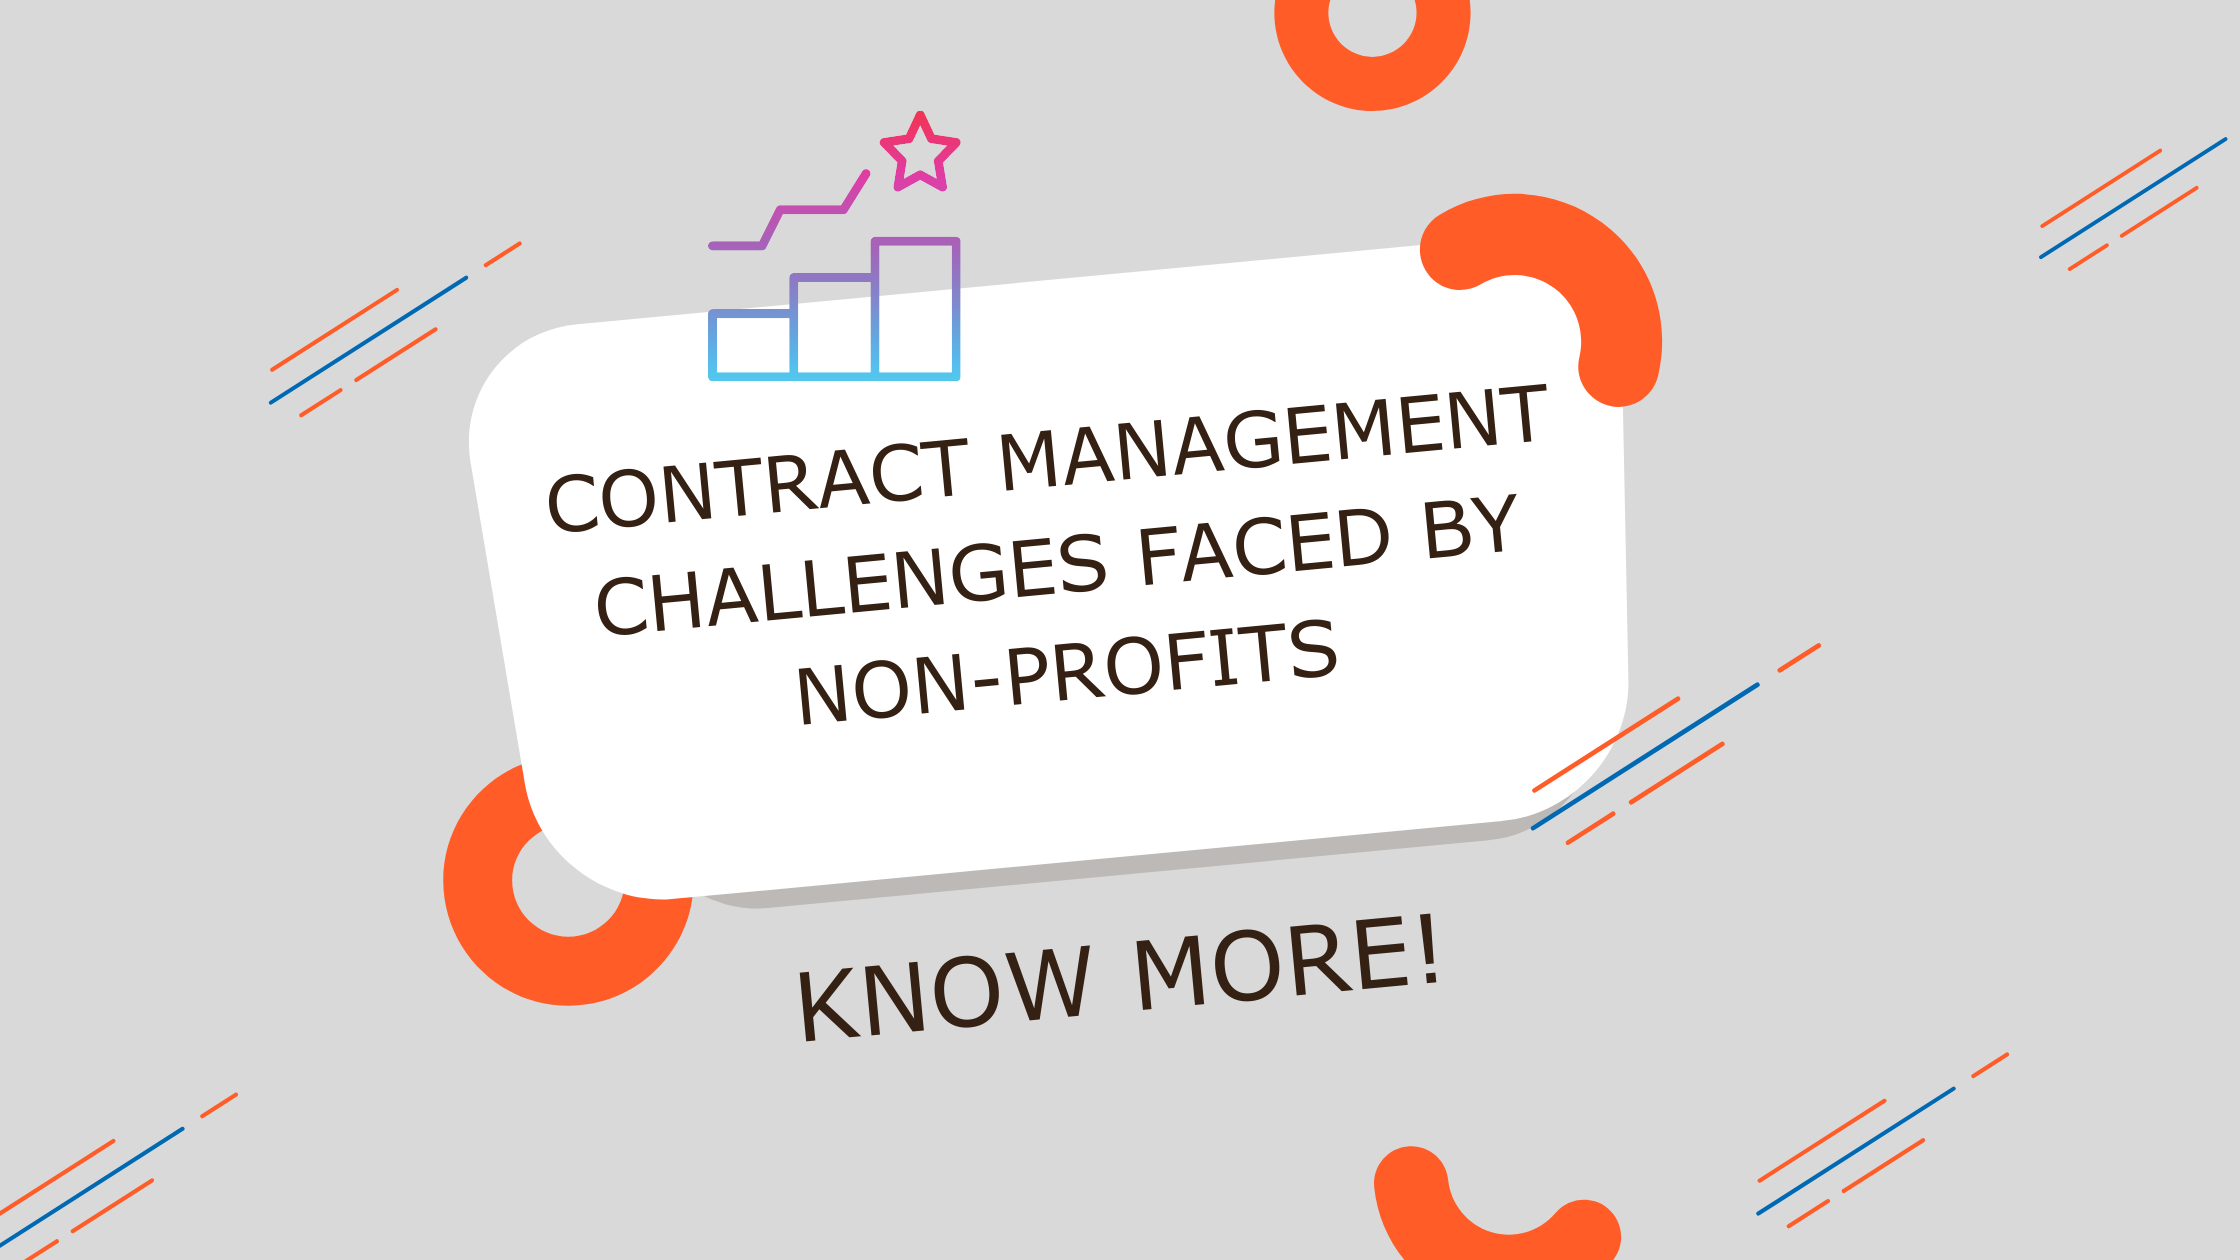 6 Major Contract Management Challenges Faced by Non-Profits